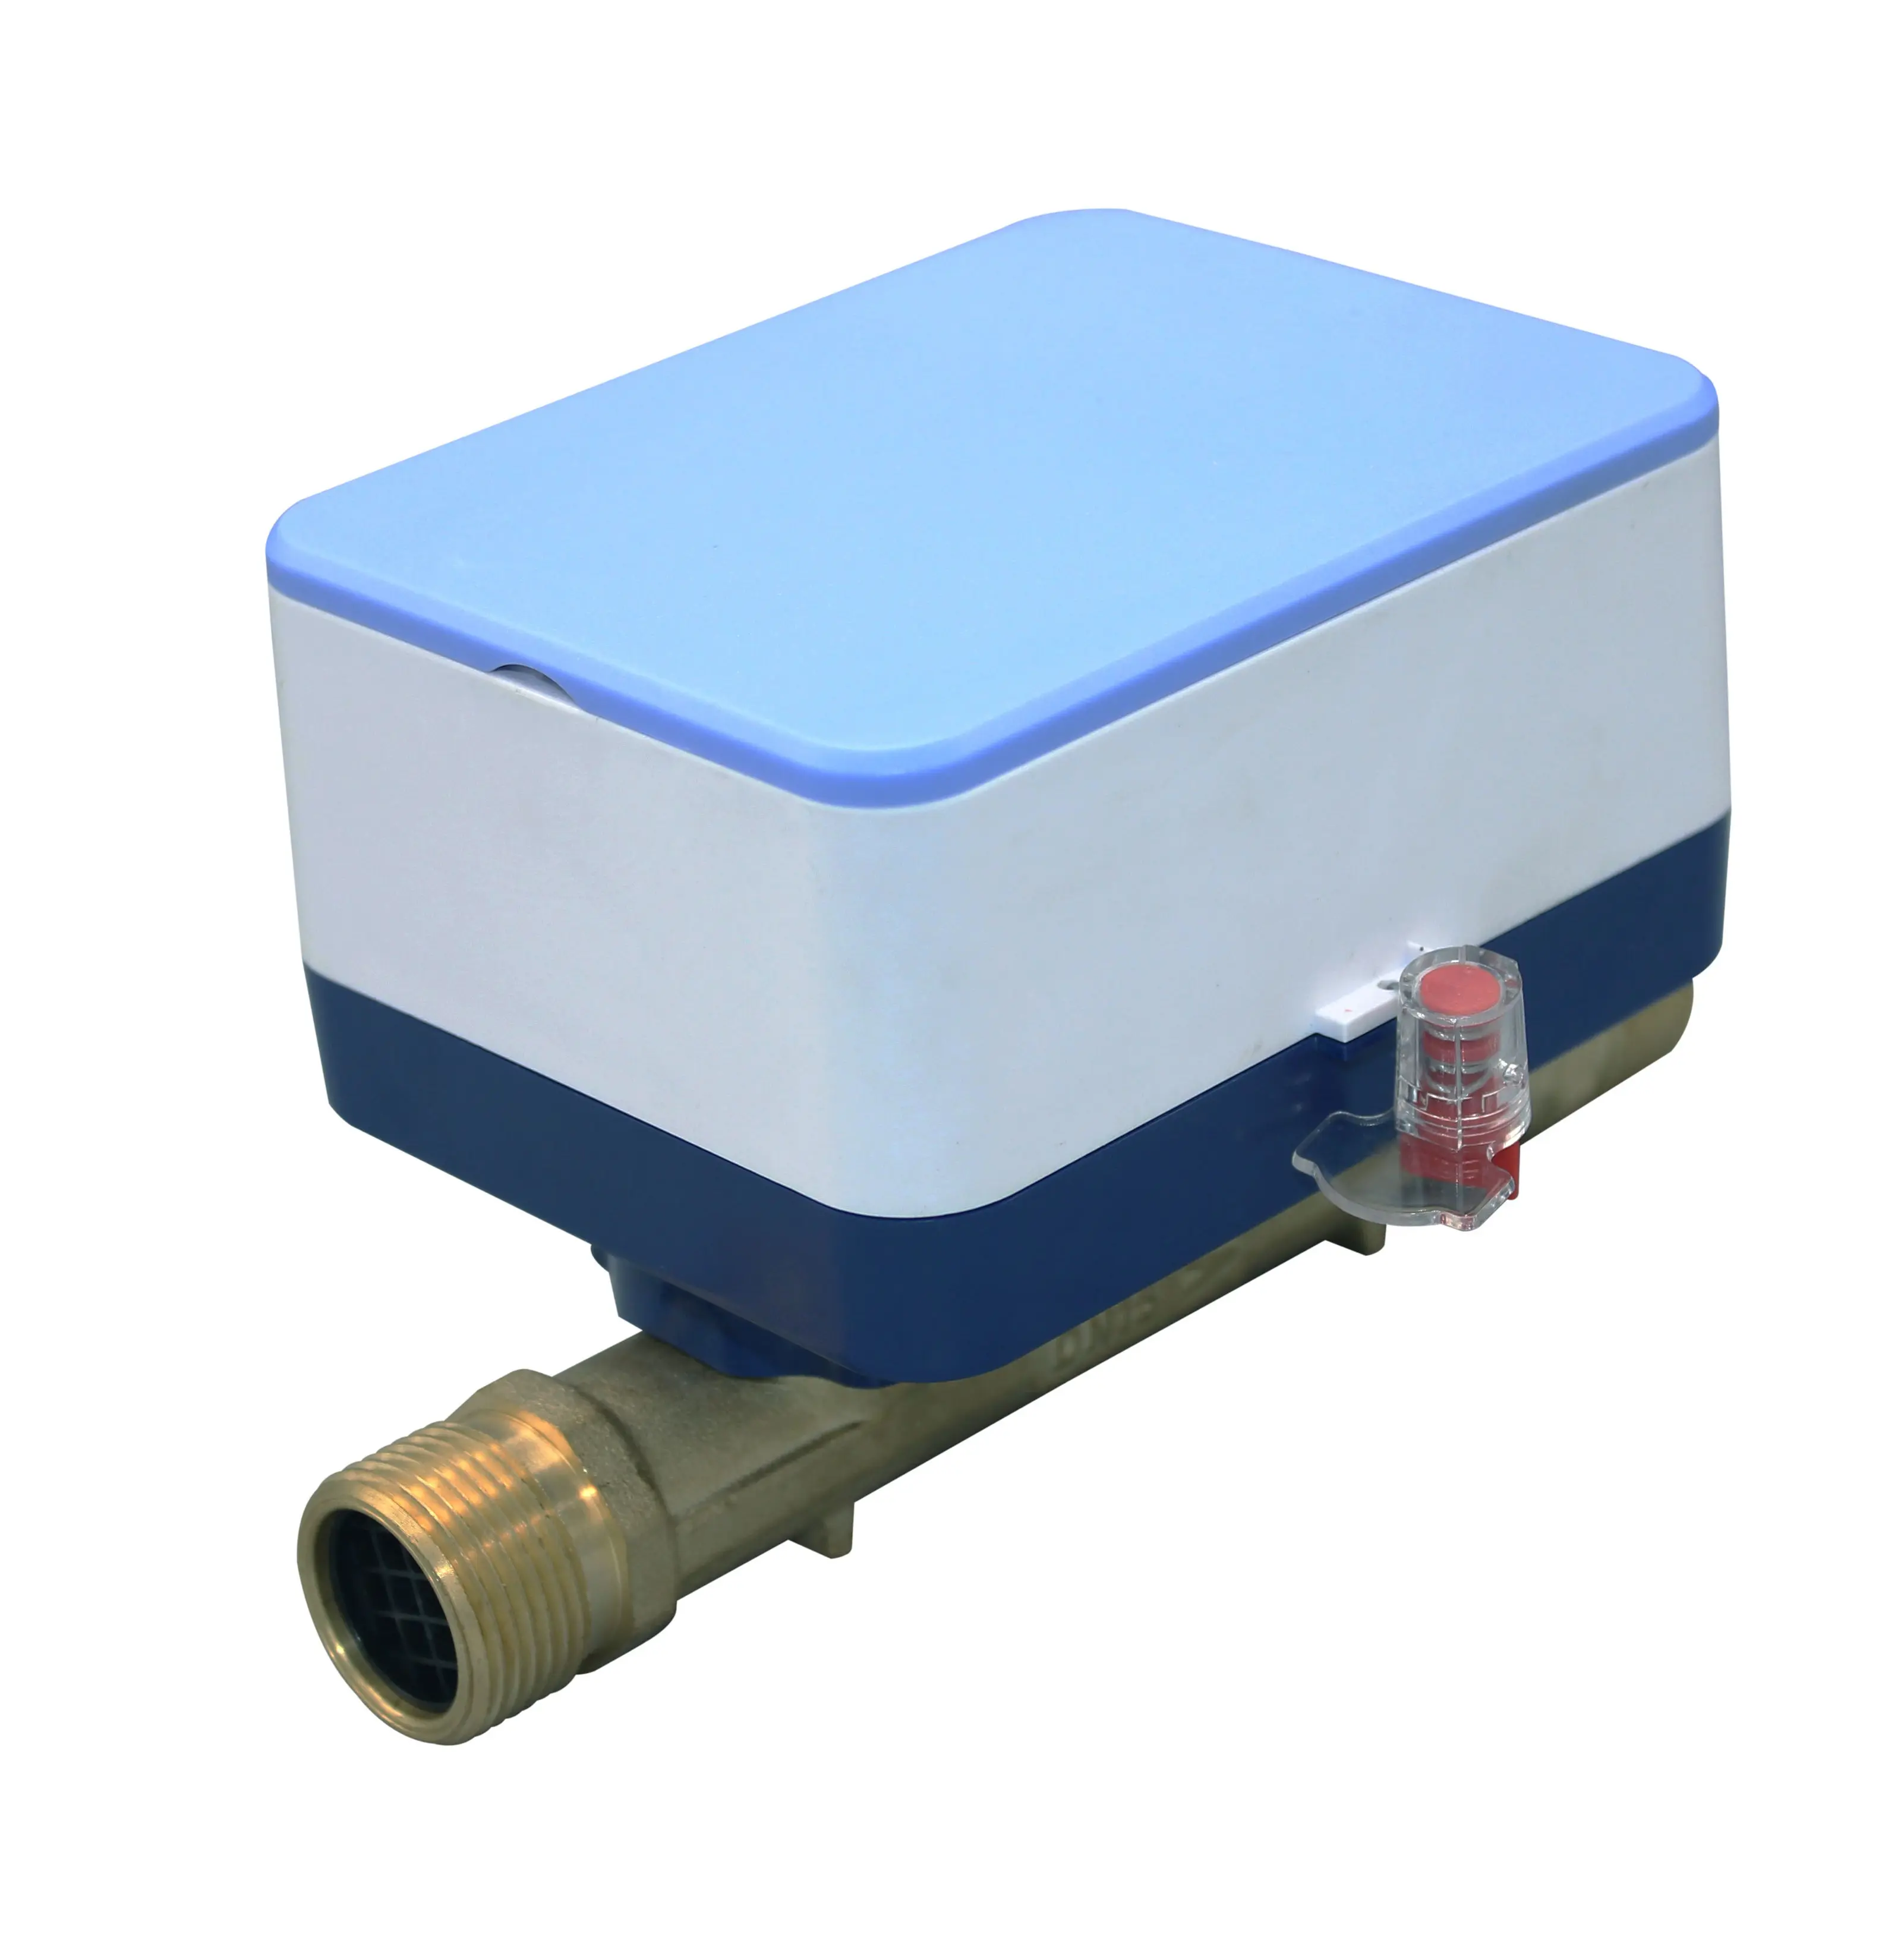 Valve-controlled LoRaWAN wireless remote reading smart water meter accuracy R400